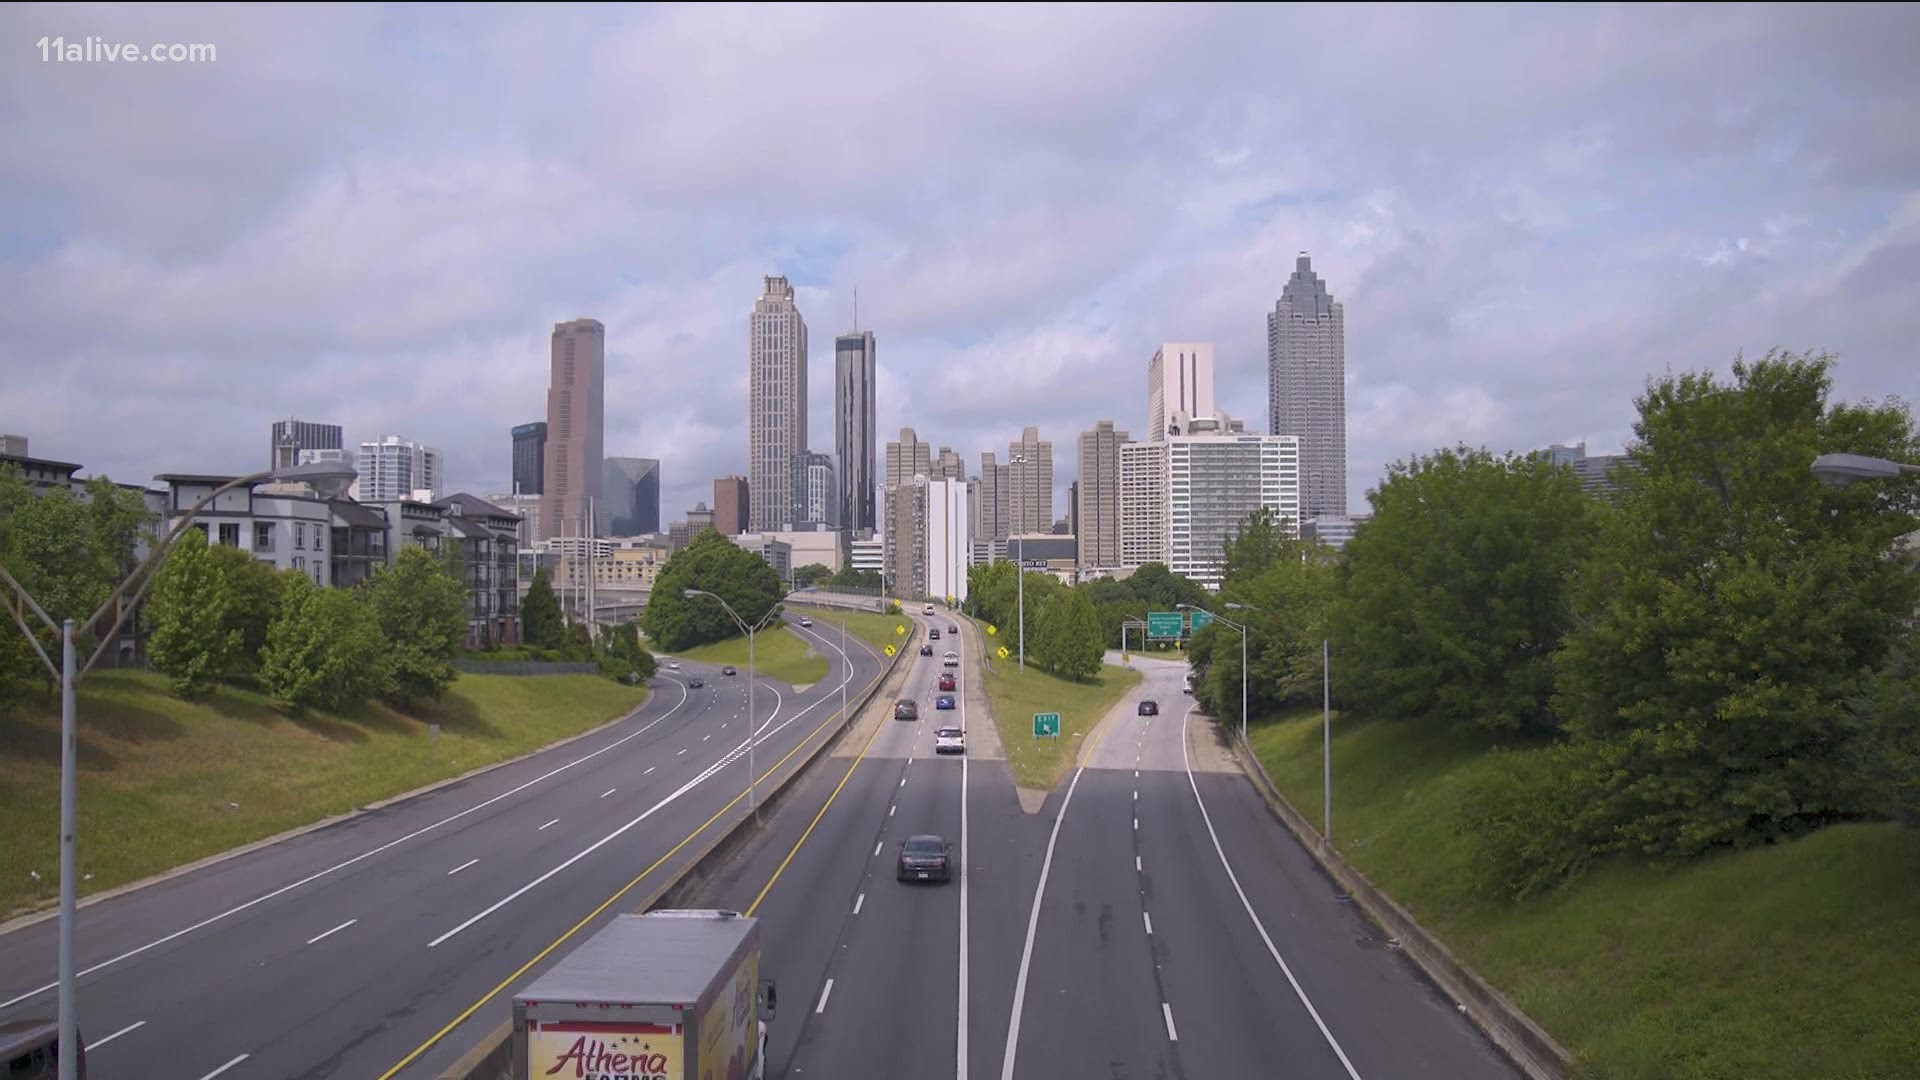 11Alive is where Atlanta speaks and our Matt Pearl spoke with Atlantans, including himself about what's next.